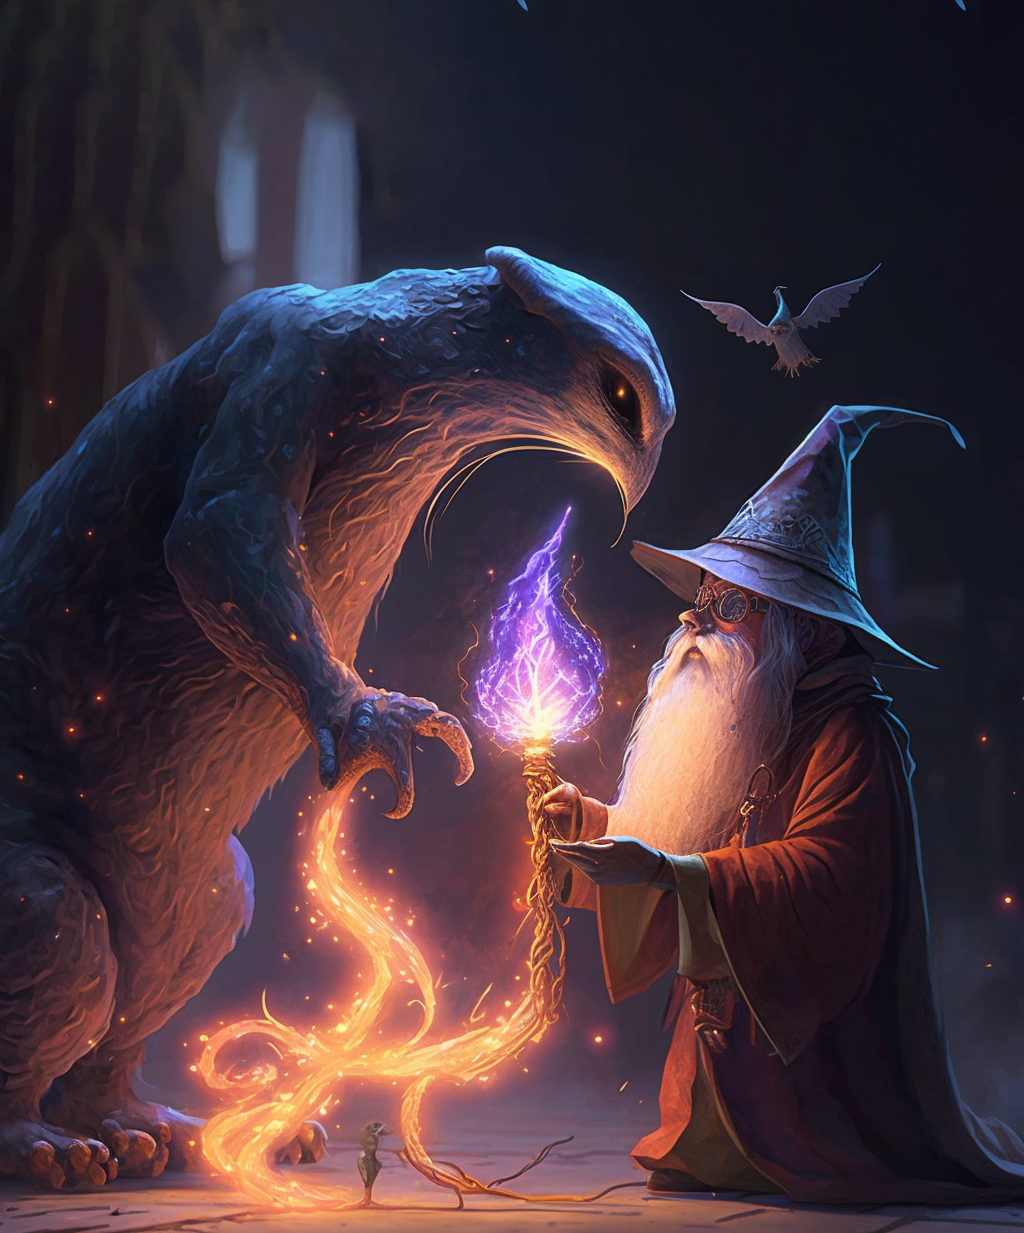 Small wizard summoning a large harry creature with a beak